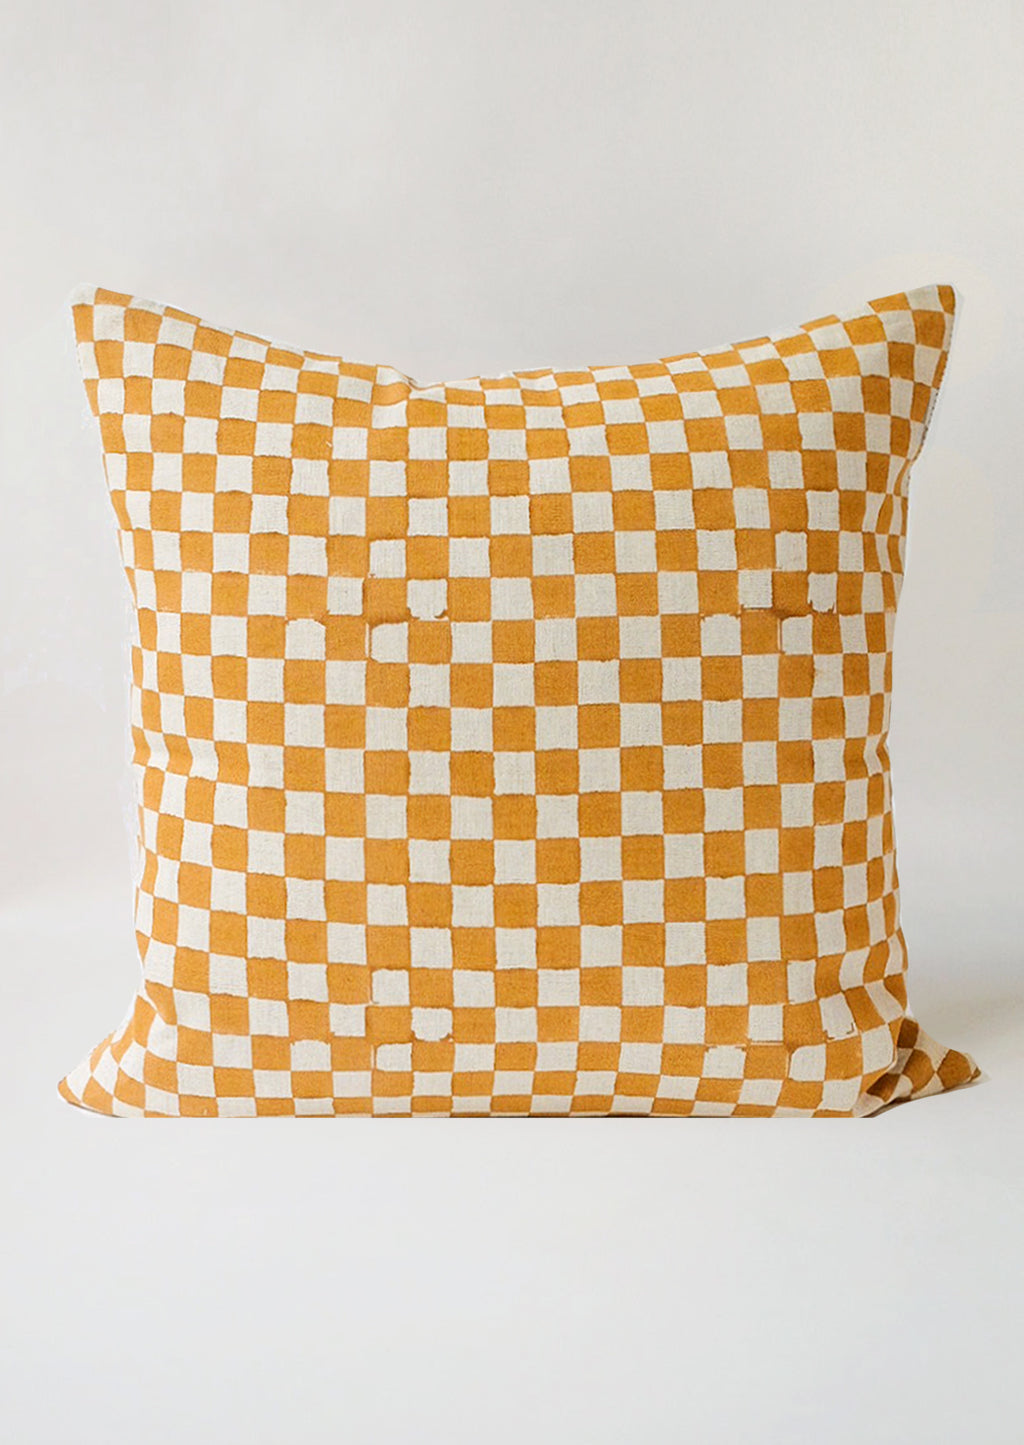 2: The reverse side of a square pillow with mustard checker print.